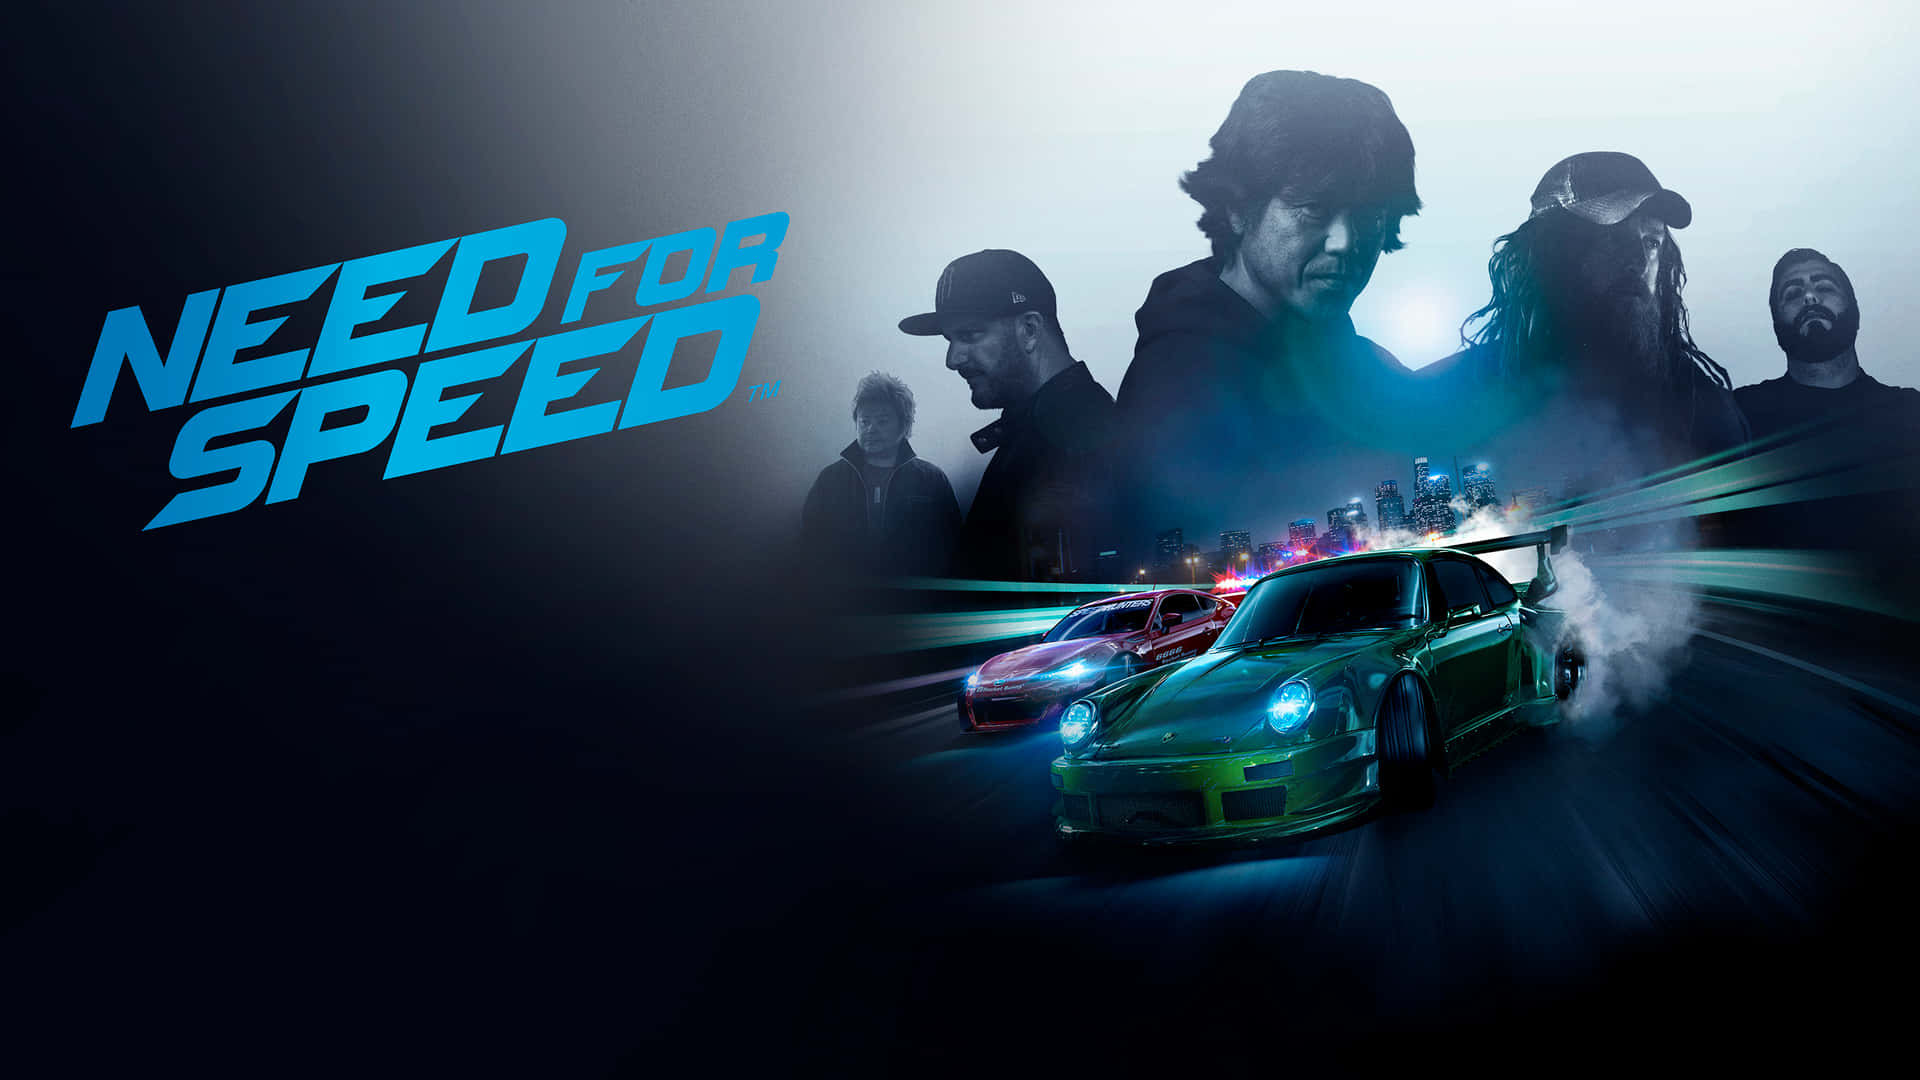 Need For Speed Background With The Racer